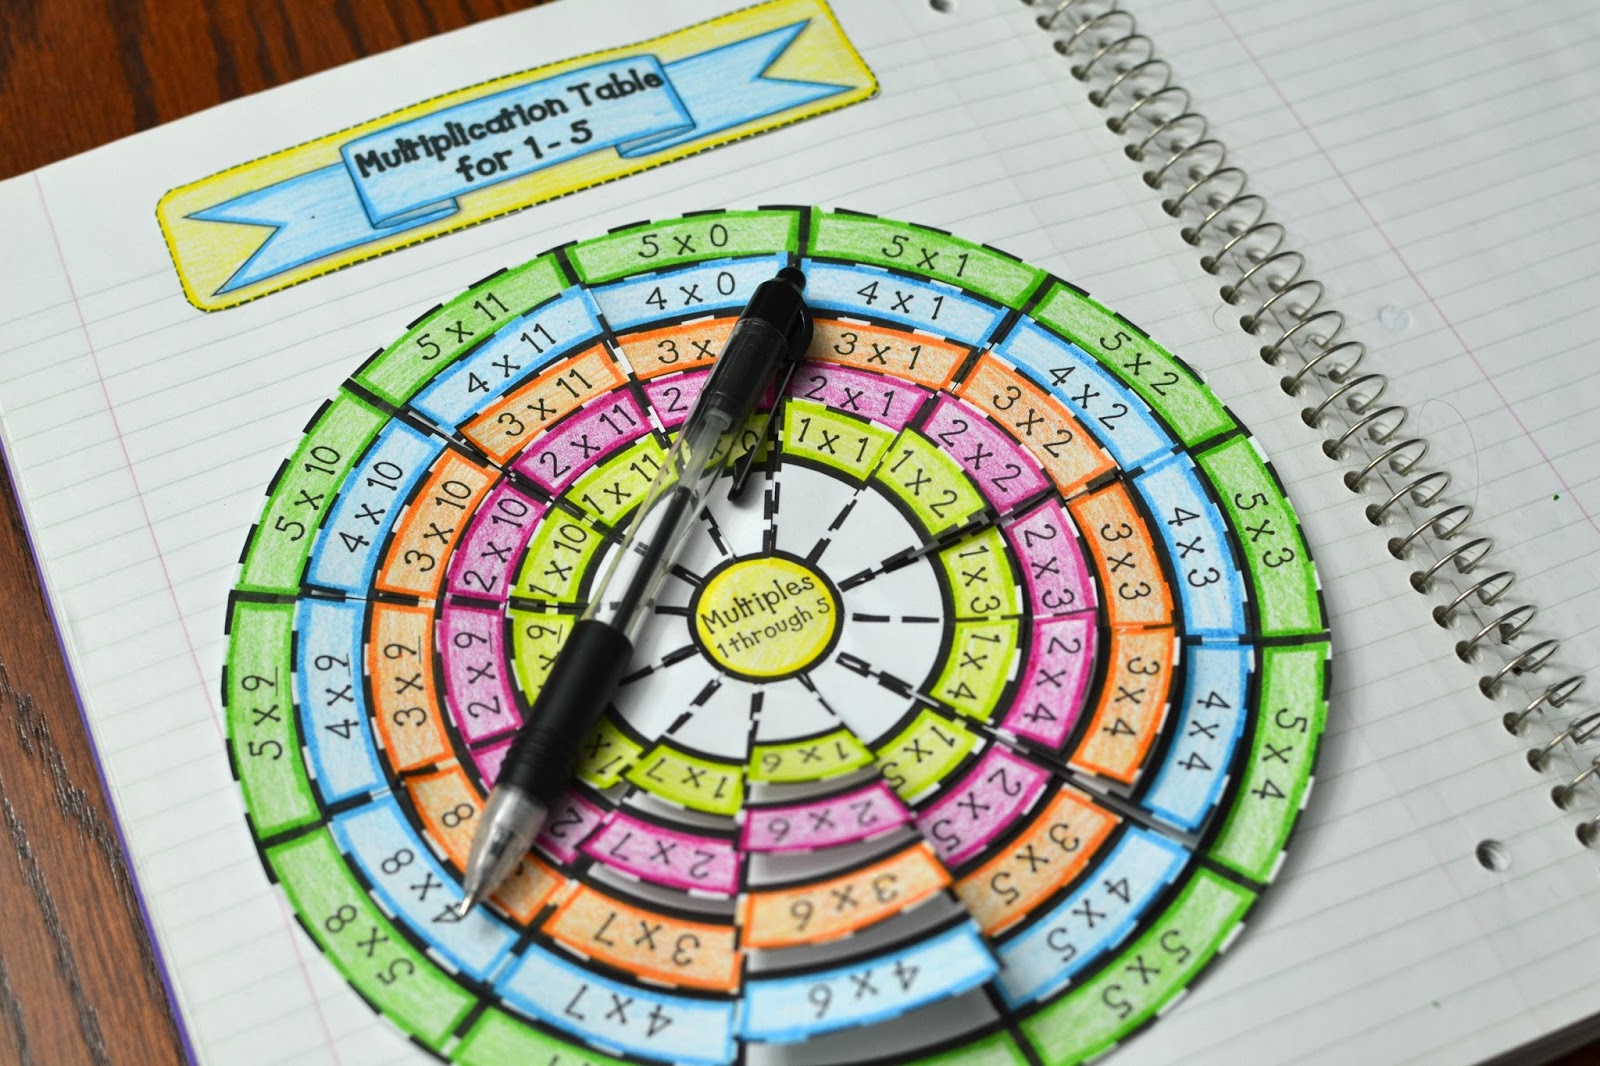 Math in Demand: Multiplication Table Wheel Foldable (Times Table